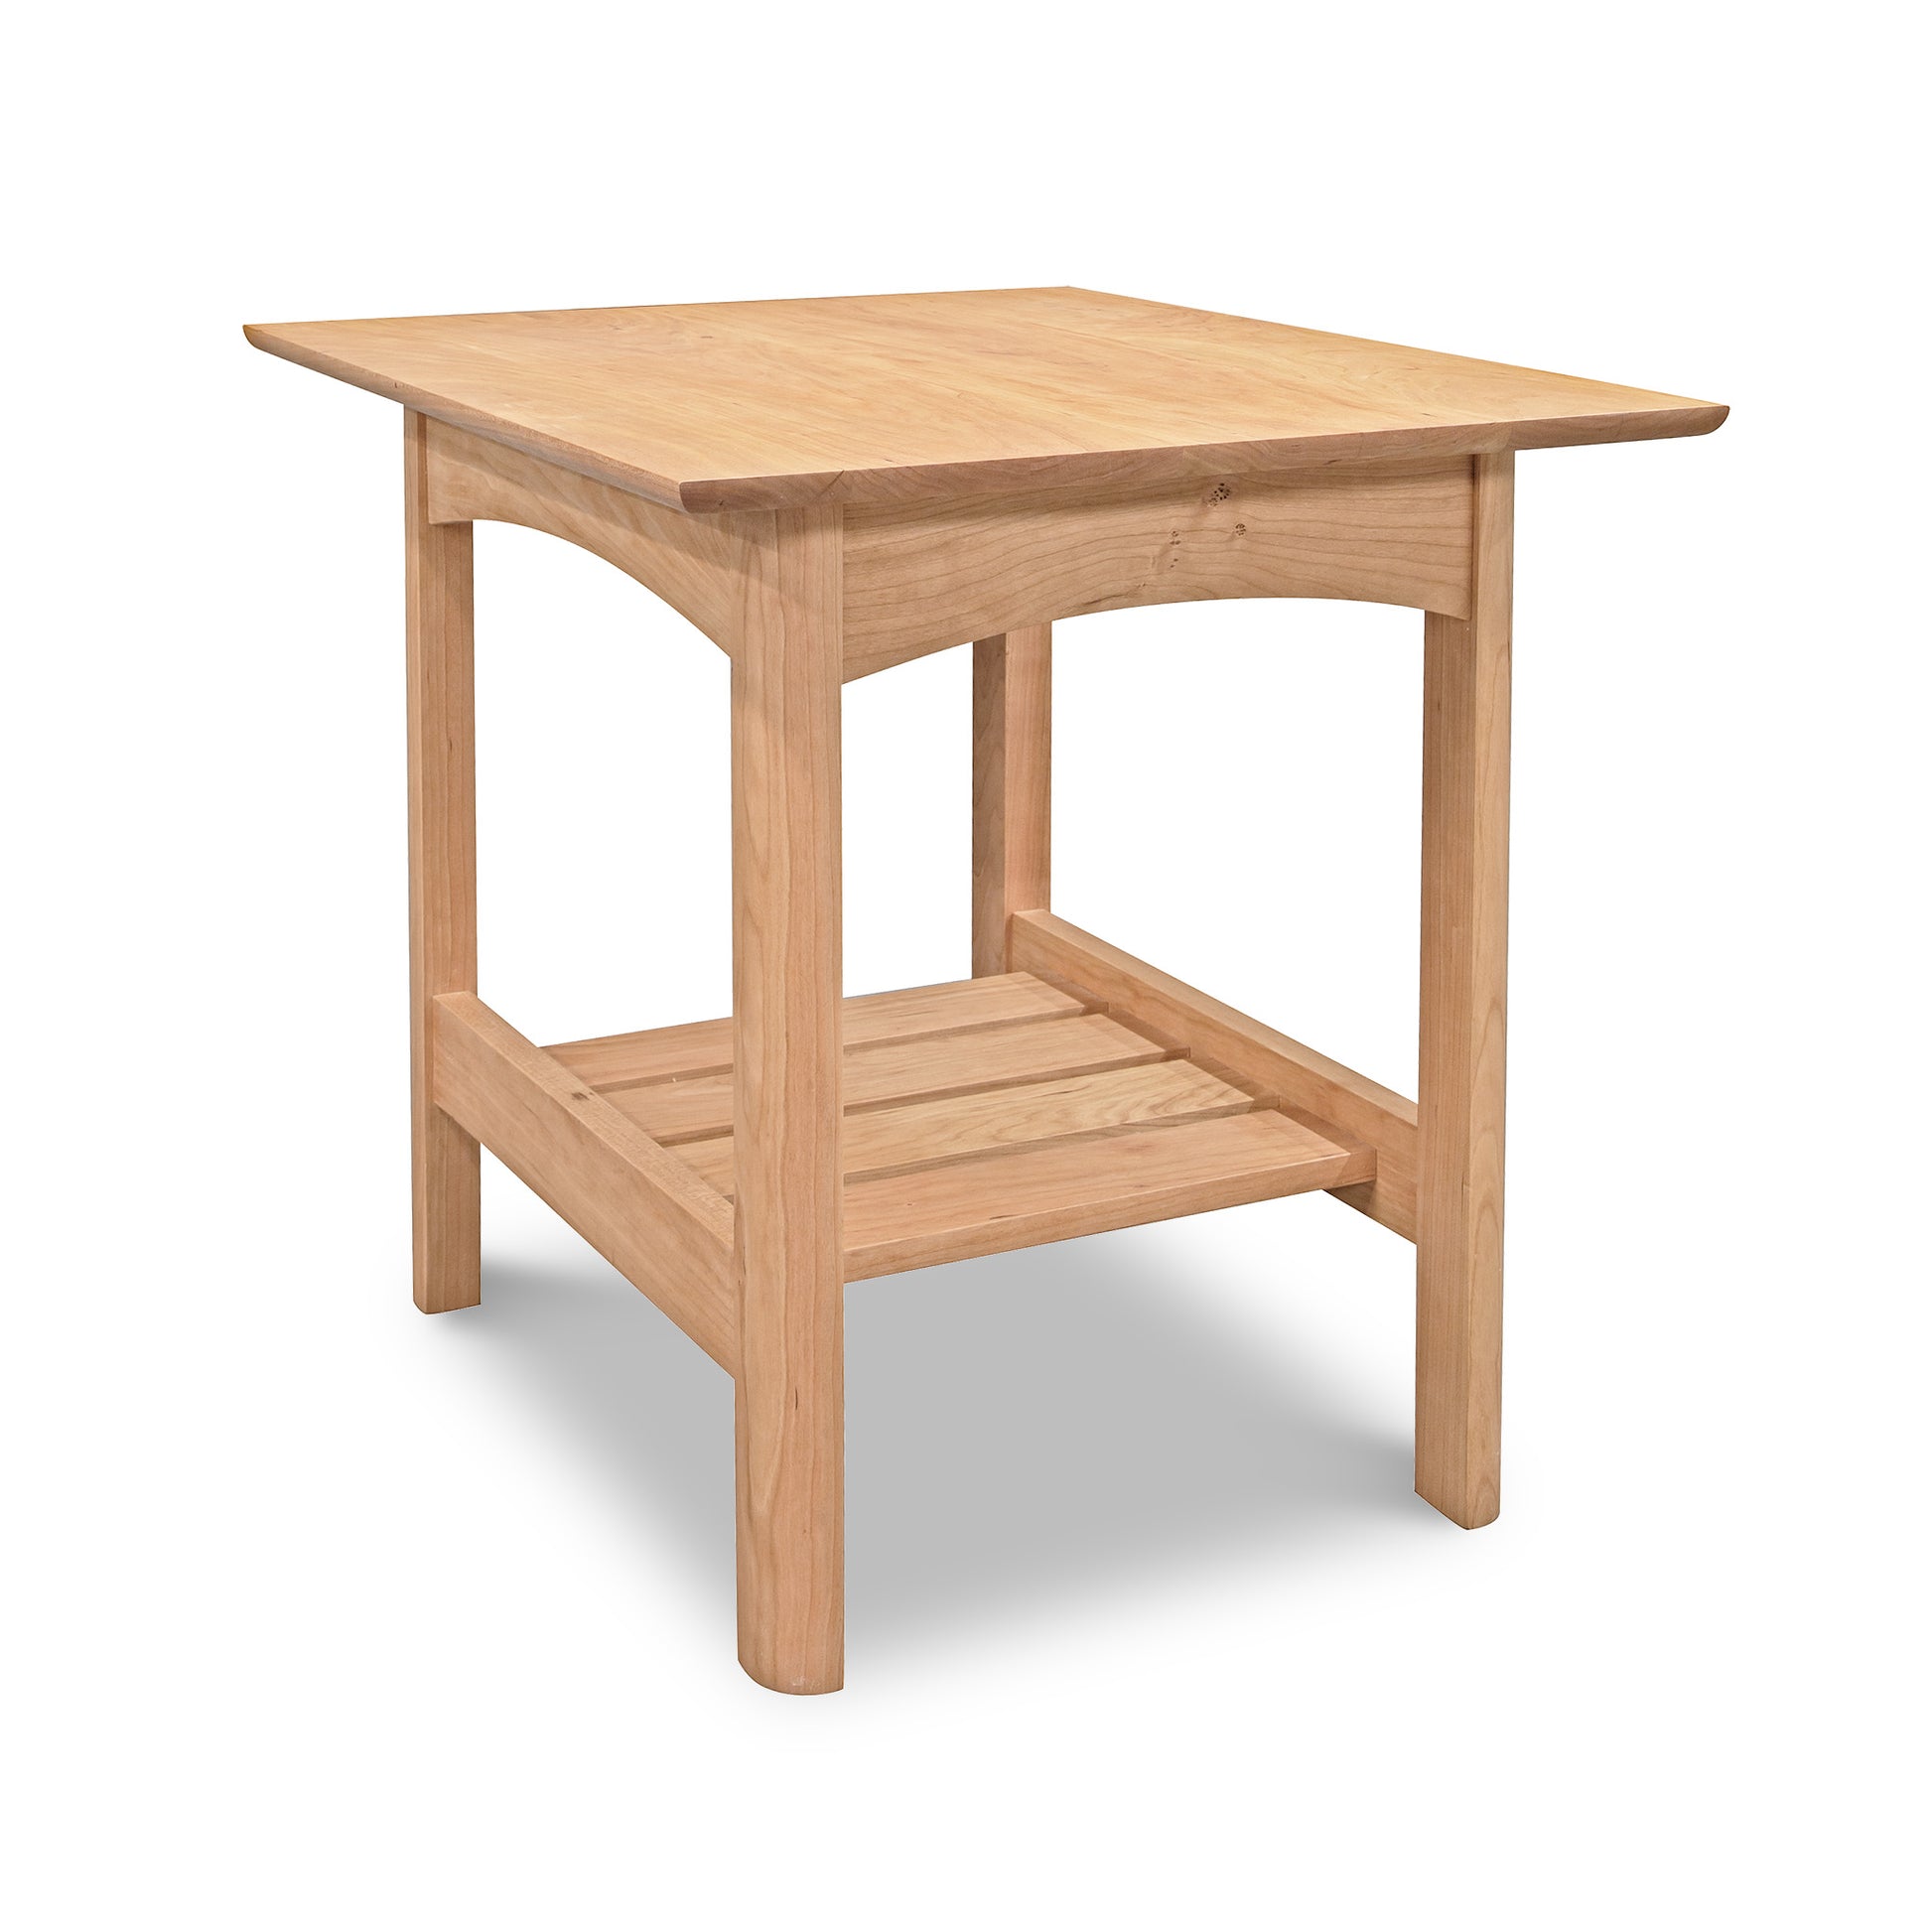 A Heartwood Shaker Lamp Table crafted from solid wood, featuring a convenient shelf on top.